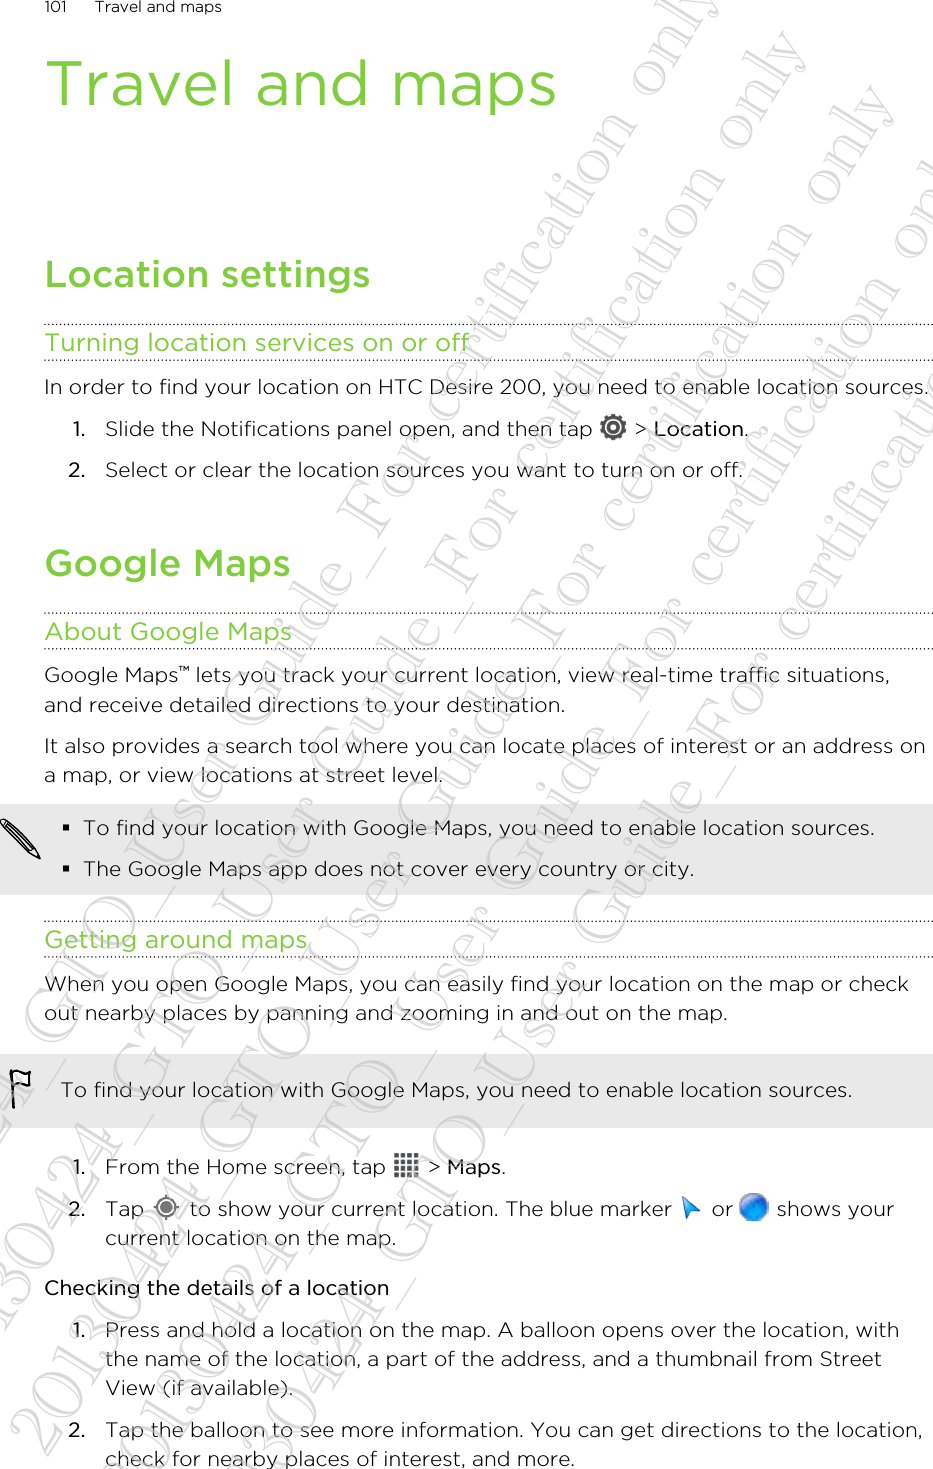 Travel and mapsLocation settingsTurning location services on or offIn order to find your location on HTC Desire 200, you need to enable location sources.1. Slide the Notifications panel open, and then tap   &gt; Location.2. Select or clear the location sources you want to turn on or off.Google MapsAbout Google MapsGoogle Maps™ lets you track your current location, view real-time traffic situations,and receive detailed directions to your destination.It also provides a search tool where you can locate places of interest or an address ona map, or view locations at street level.§To find your location with Google Maps, you need to enable location sources.§The Google Maps app does not cover every country or city.Getting around mapsWhen you open Google Maps, you can easily find your location on the map or checkout nearby places by panning and zooming in and out on the map.To find your location with Google Maps, you need to enable location sources.1. From the Home screen, tap   &gt; Maps.2. Tap   to show your current location. The blue marker   or   shows yourcurrent location on the map.Checking the details of a location1. Press and hold a location on the map. A balloon opens over the location, withthe name of the location, a part of the address, and a thumbnail from StreetView (if available).2. Tap the balloon to see more information. You can get directions to the location,check for nearby places of interest, and more.101 Travel and maps20130424_GTO_User Guide_For certification only 20130424_GTO_User Guide_For certification only 20130424_GTO_User Guide_For certification only 20130424_GTO_User Guide_For certification only 20130424_GTO_User Guide_For certification only